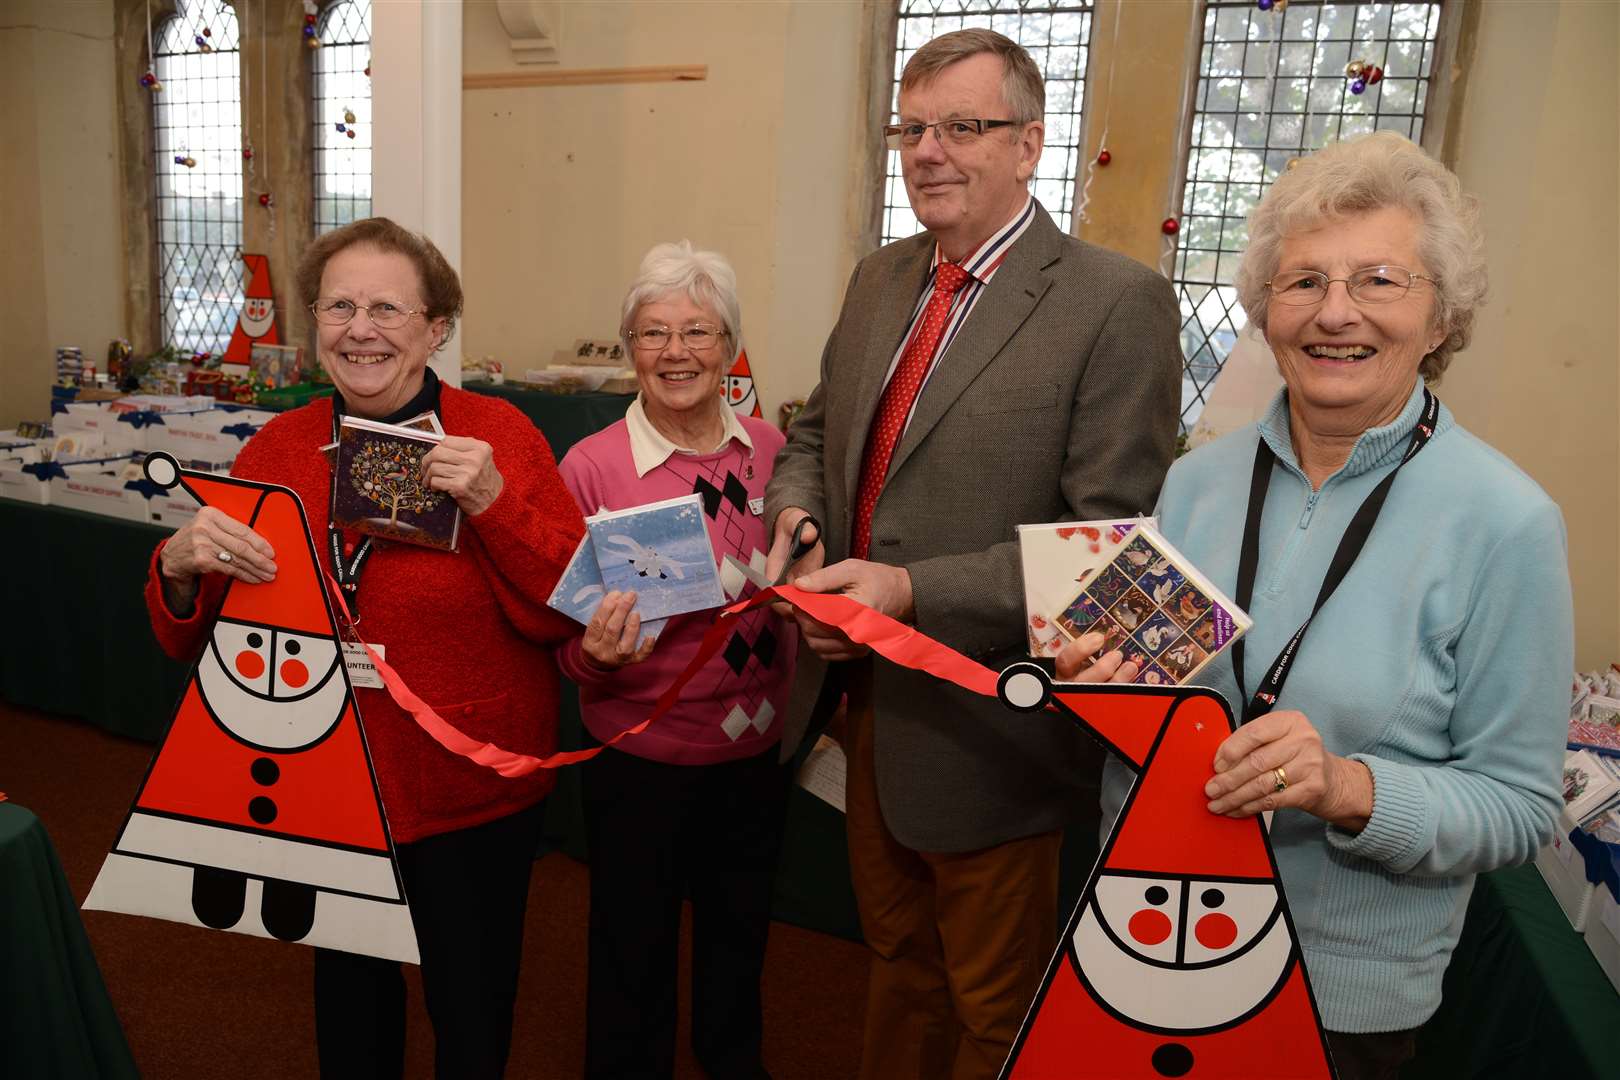 Jeanne Philpott, Diana Terry, Brian Short and Pauline Wise Launch of Cards for Good Causes at Deal Landmark Centre